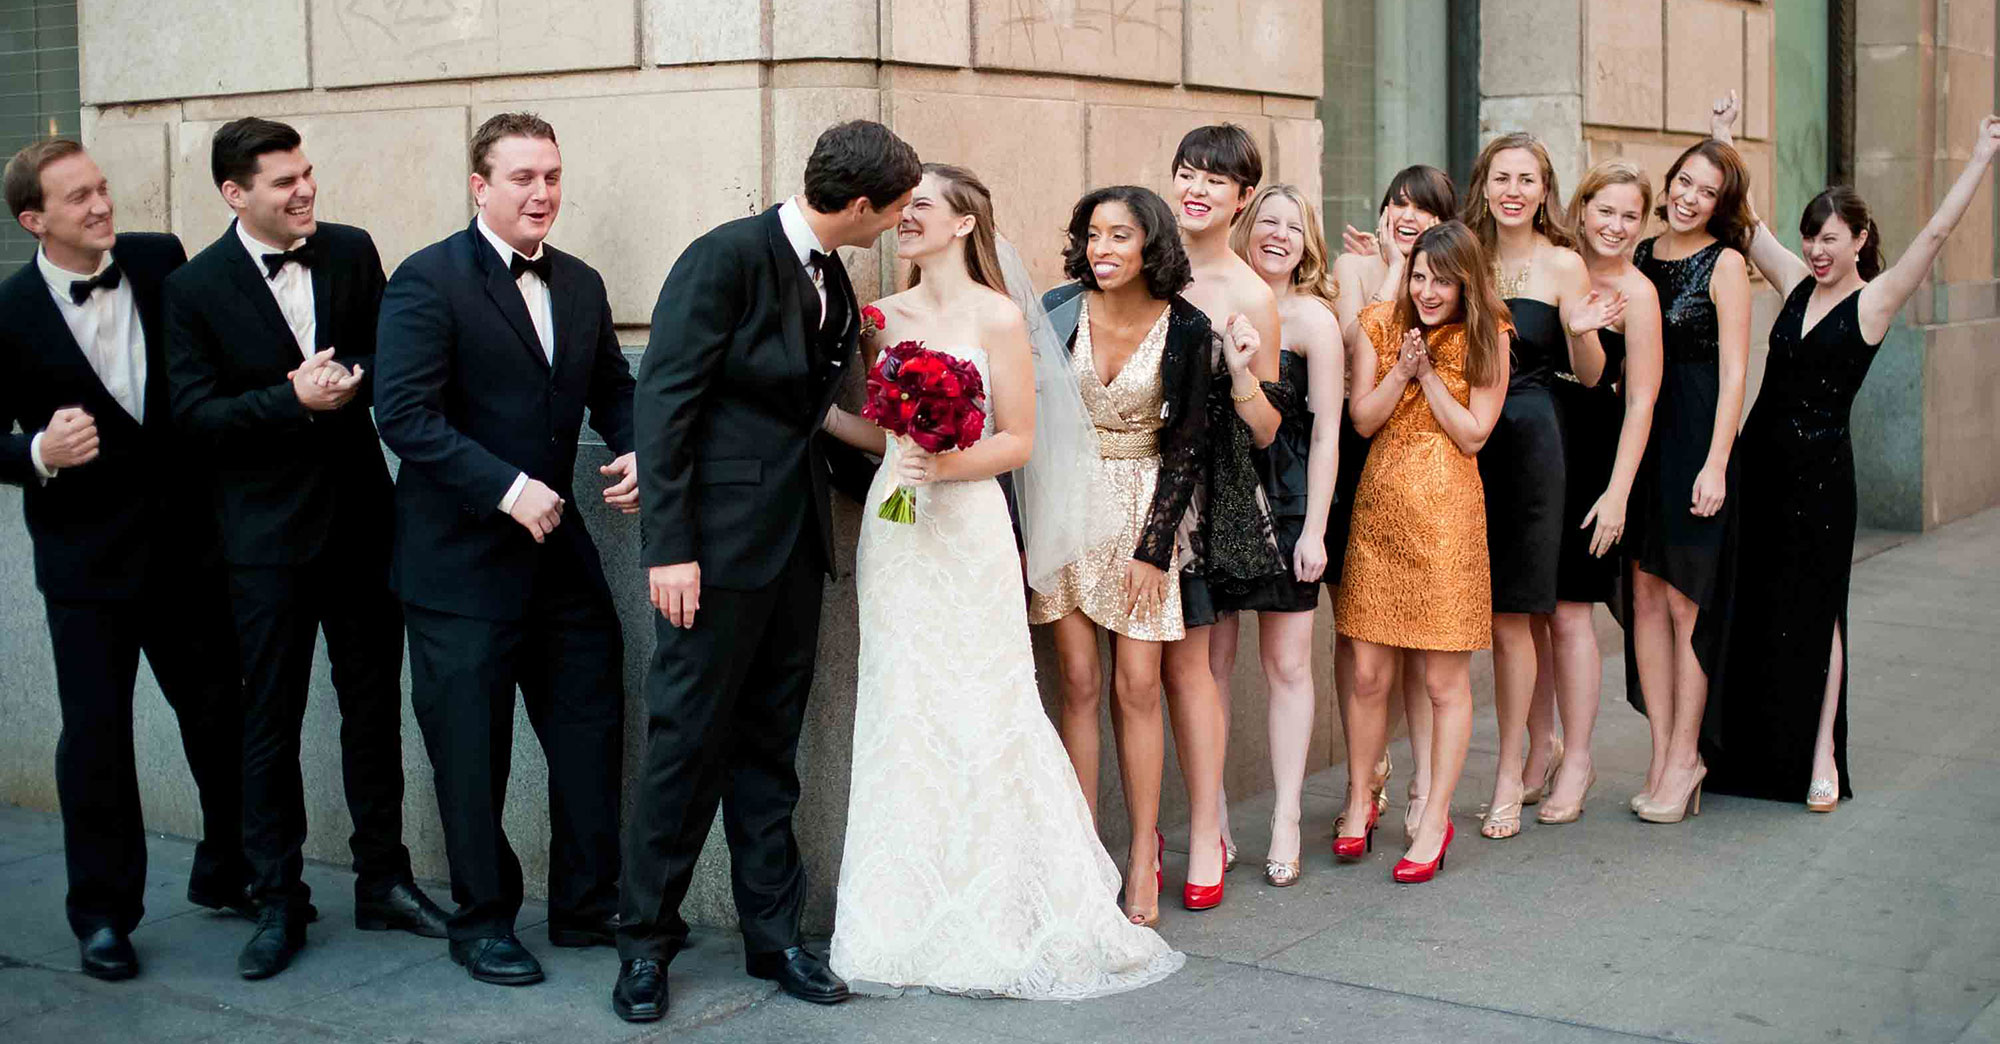 Briana & Dave’s Downtown L.A. Wedding featured slider image